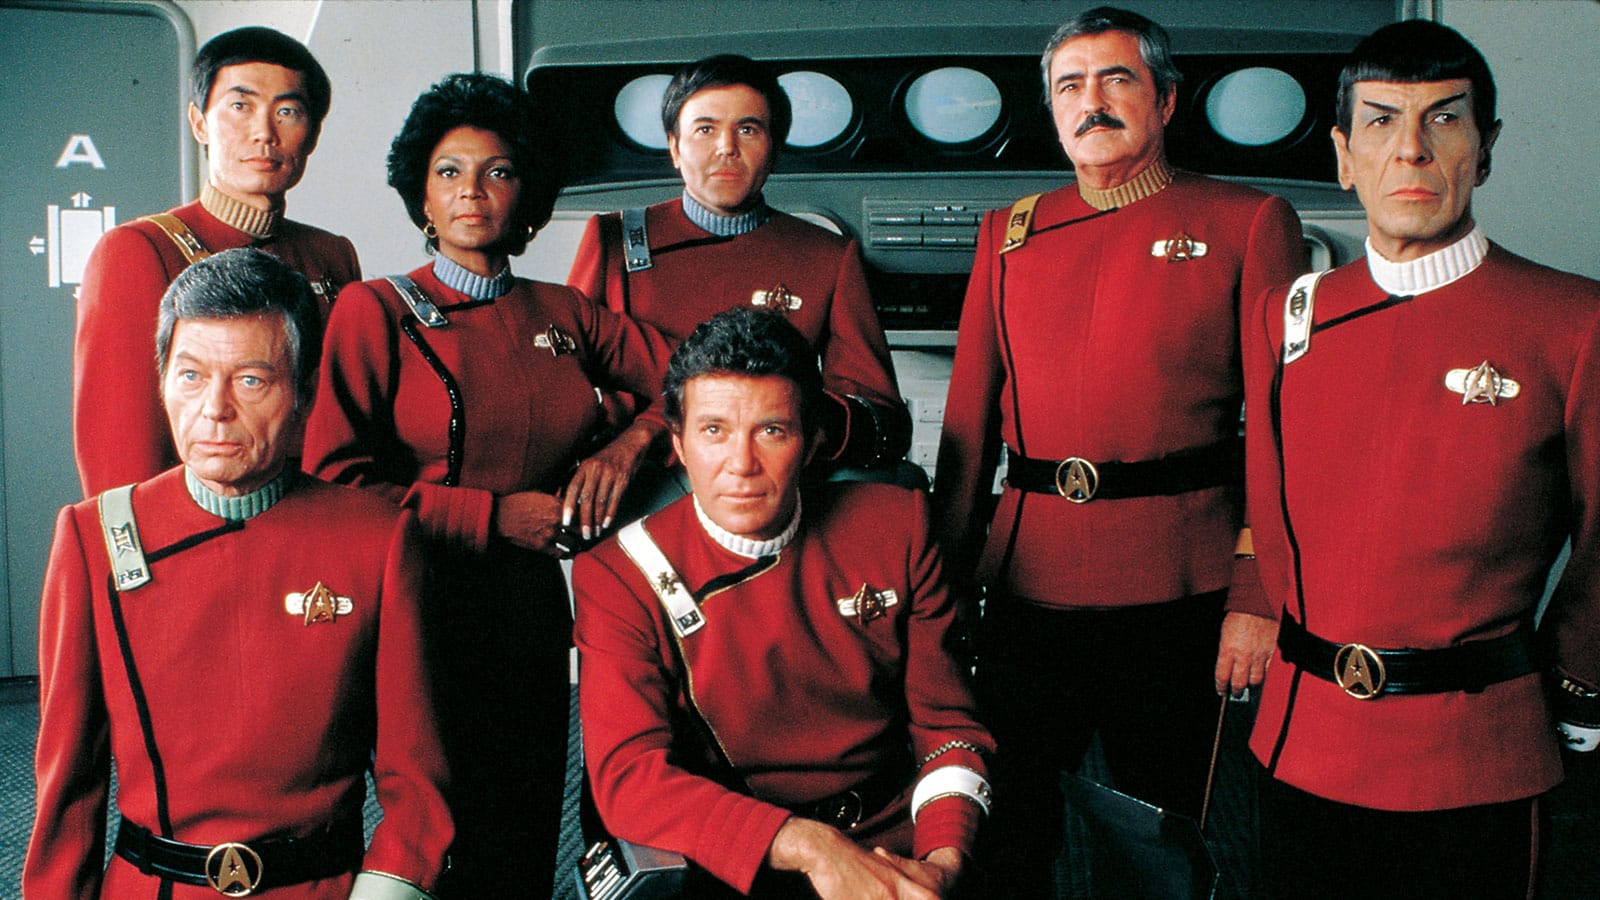 Star Trek II: The Wrath of Khan 40th anniversary faced fan backlash at release, conflict with Gene Rodenberry over script and death of Spock